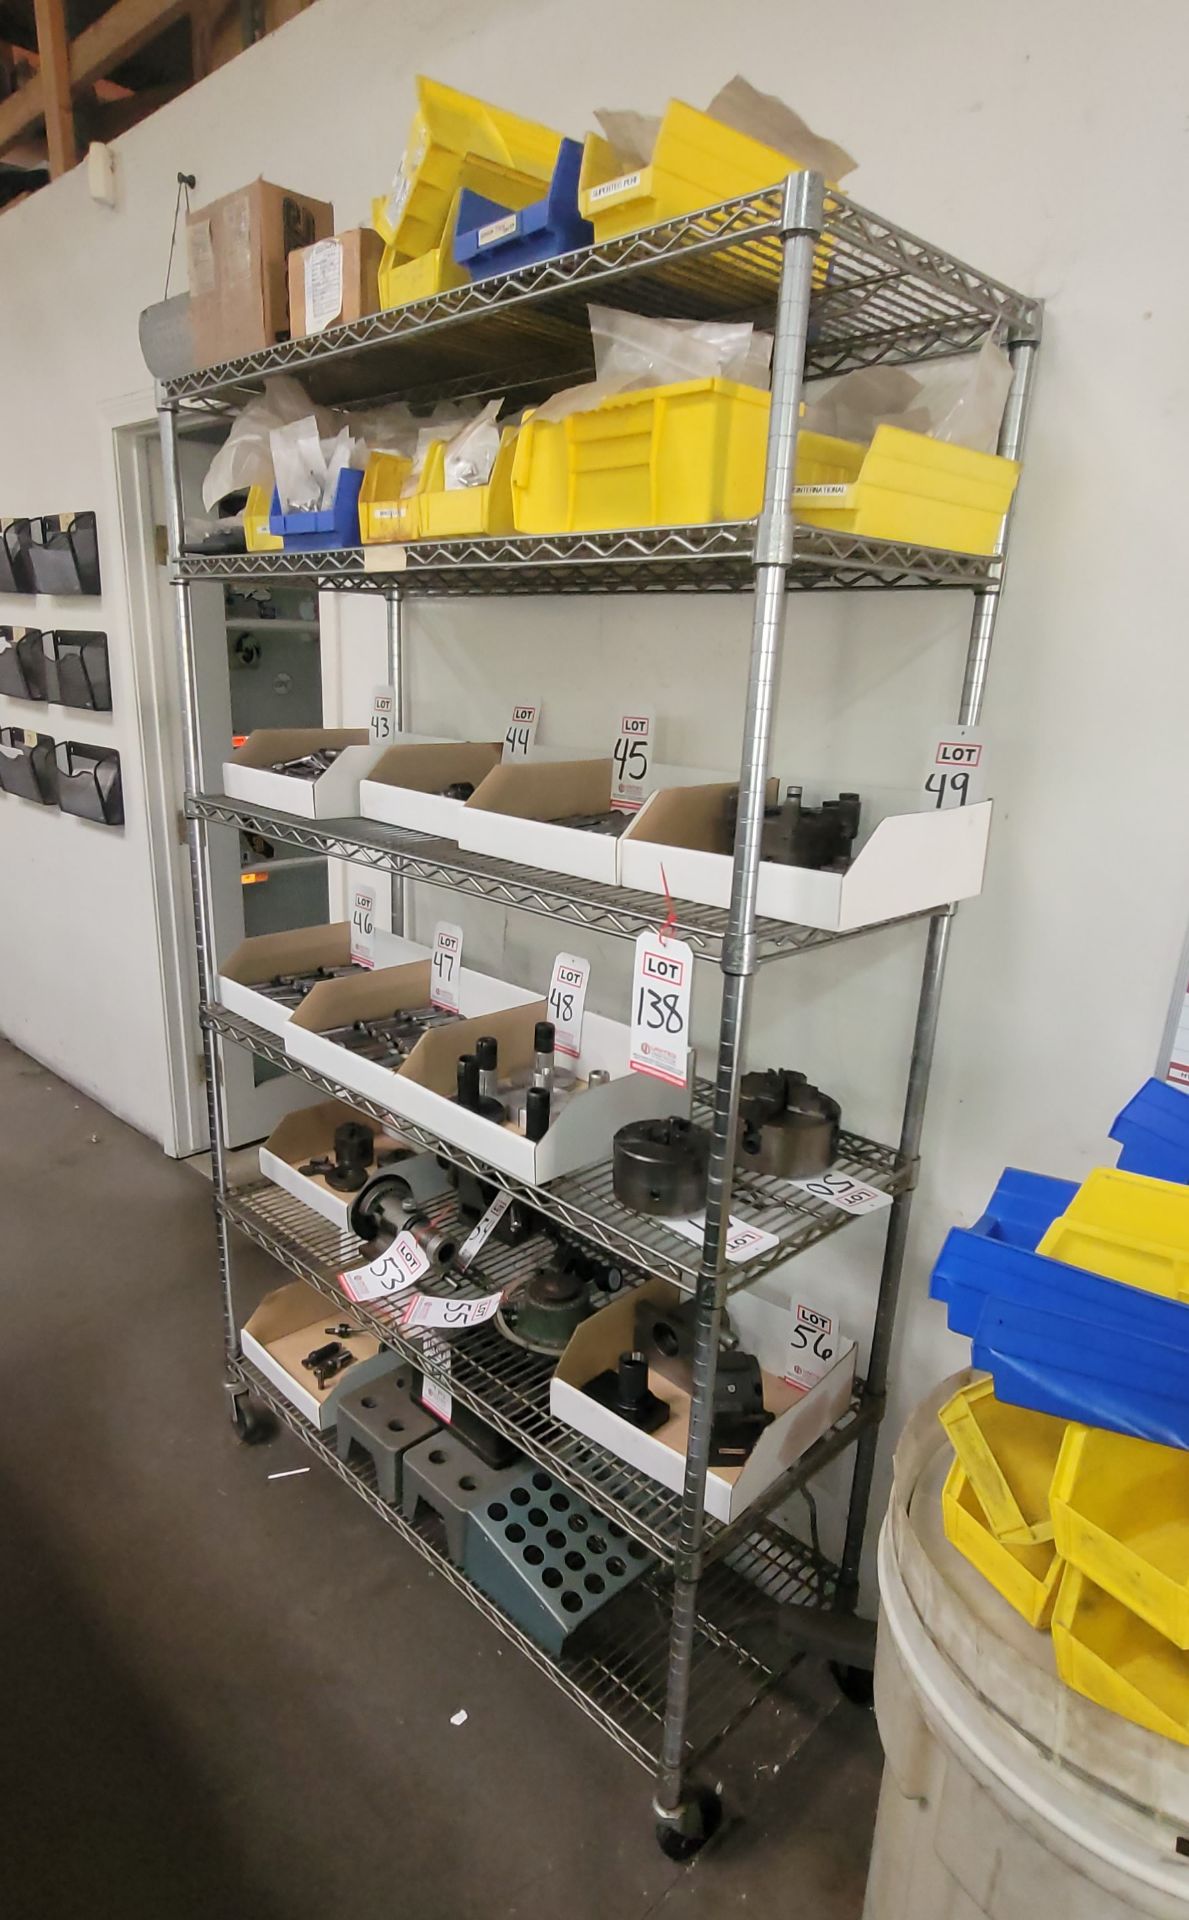 WIRE RACK ON CASTERS, 4' X 18" X 76" HT, CONTENTS NOT INCLUDED